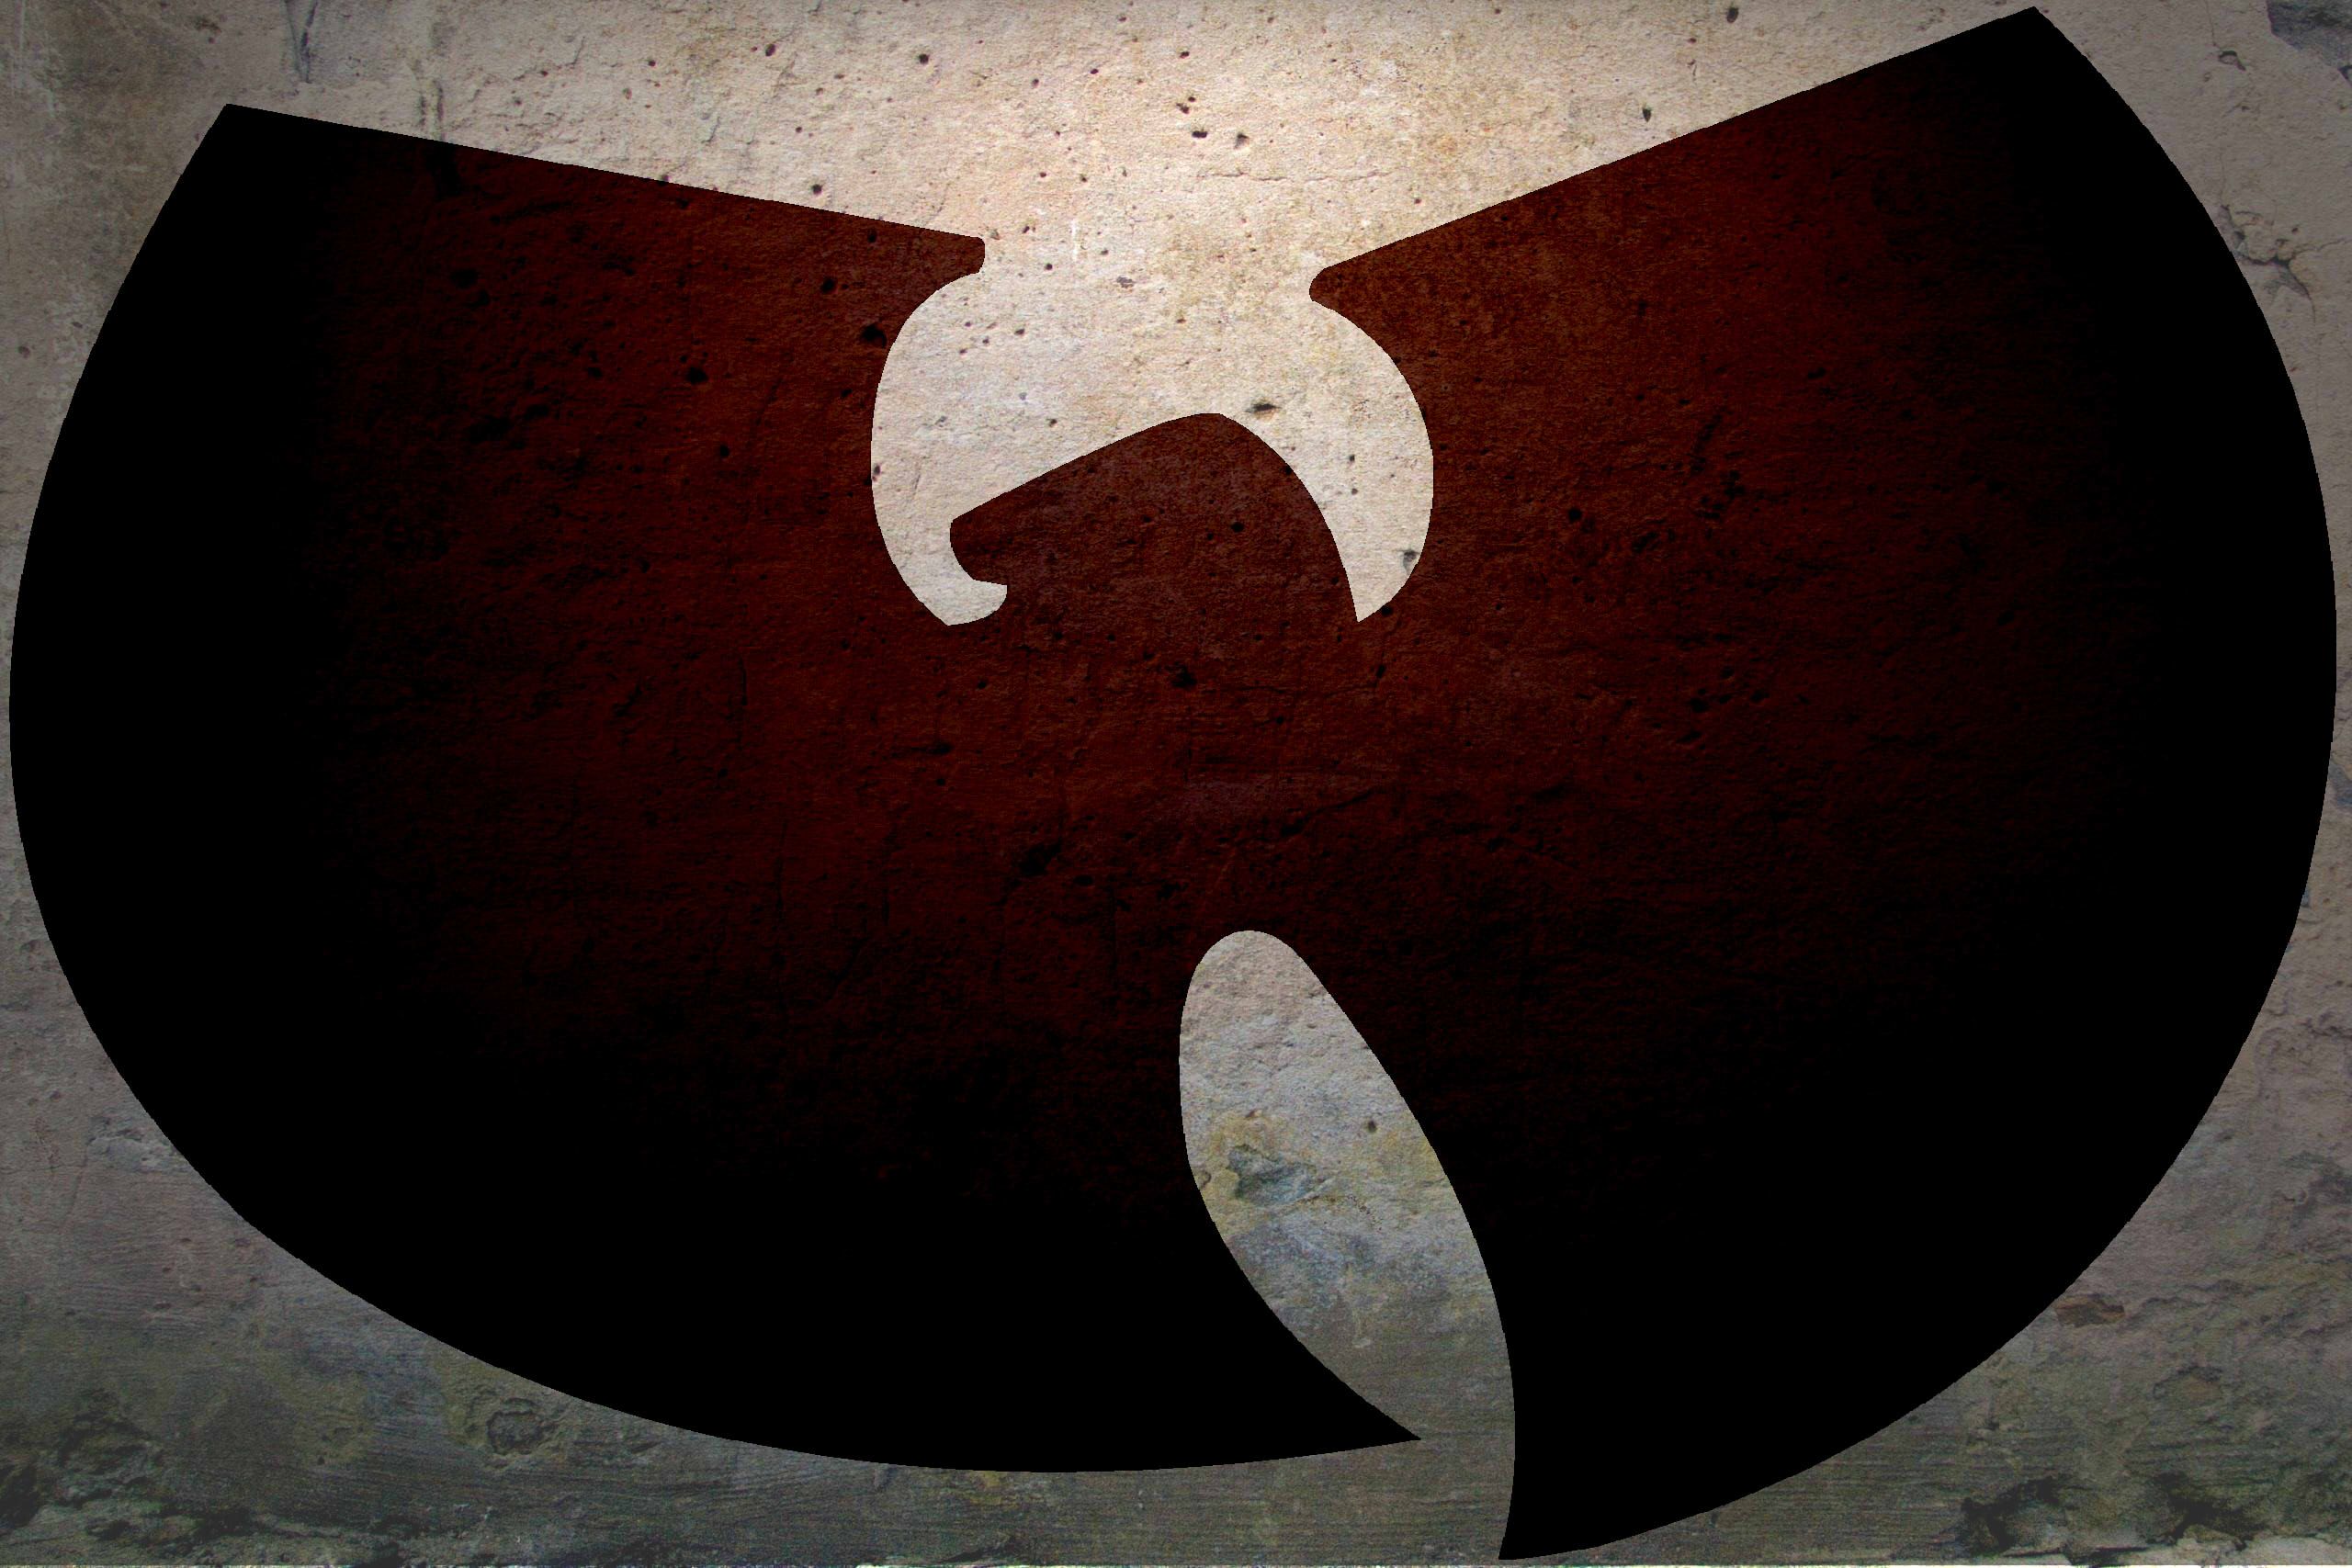 Wu tang clan wallpaper - - High Quality and Resolution